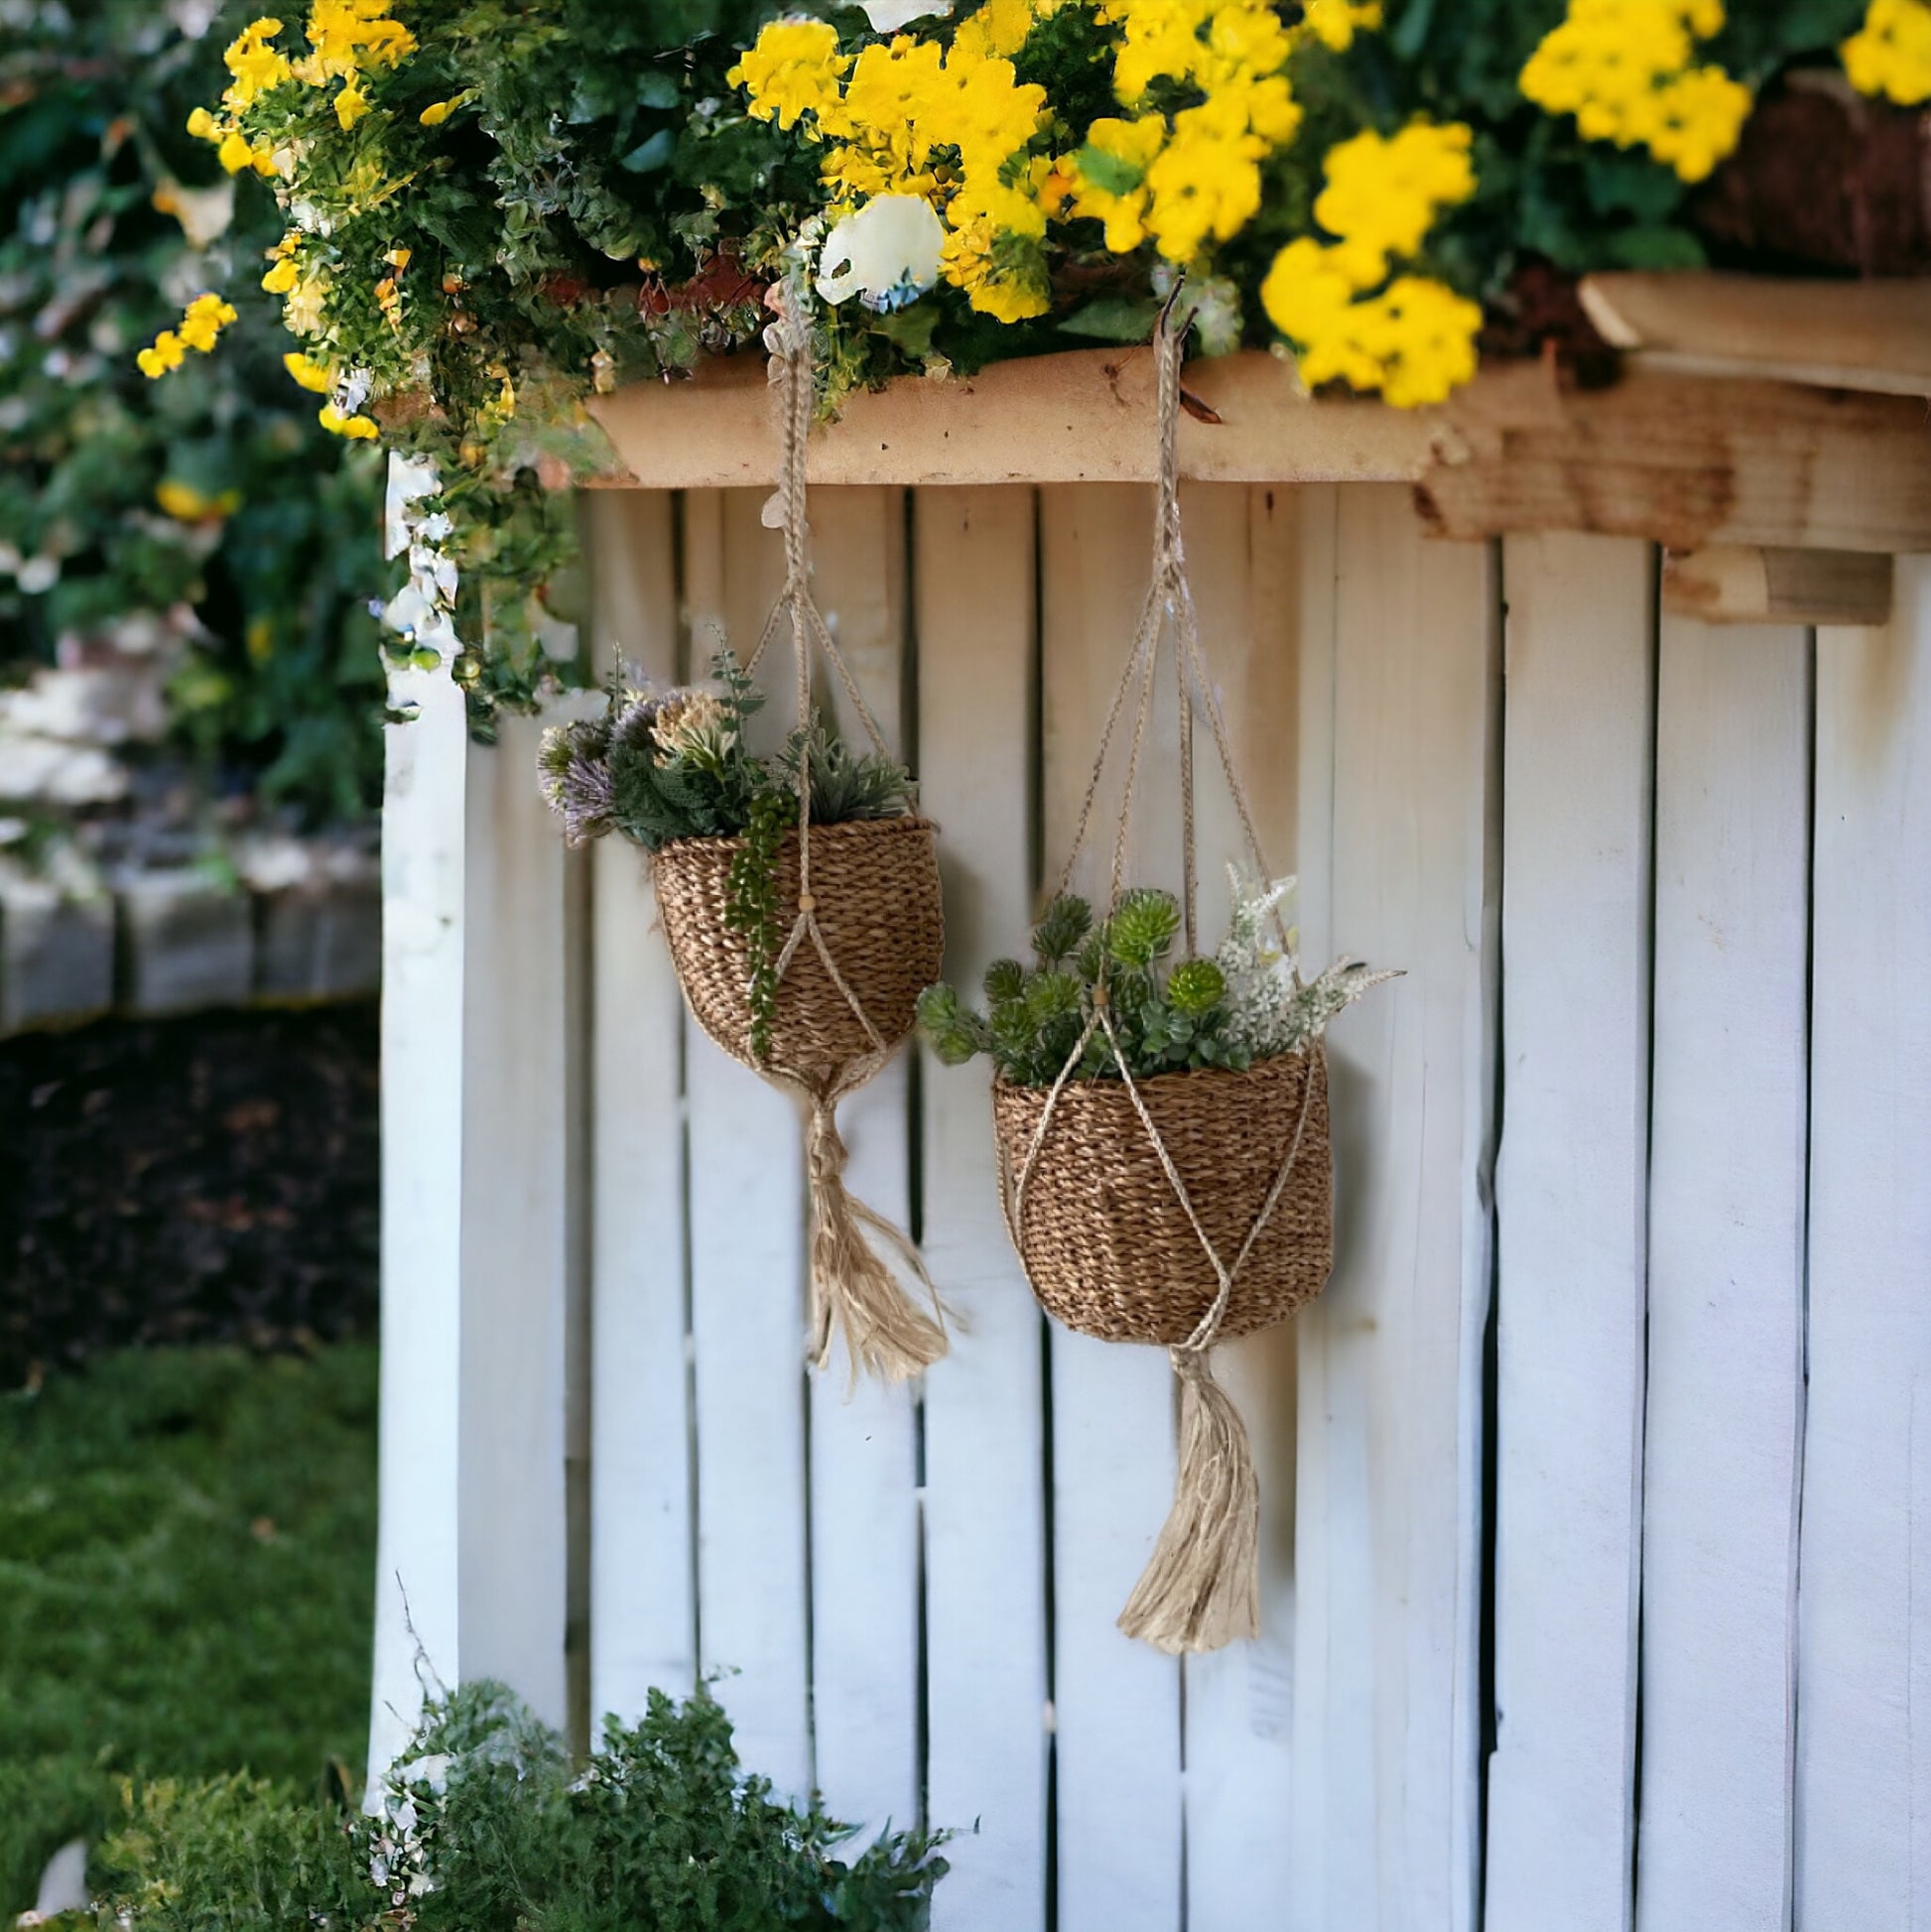 Pot Planter Plant Basket Set of 2 Hanging - The Renmy Store Homewares & Gifts 